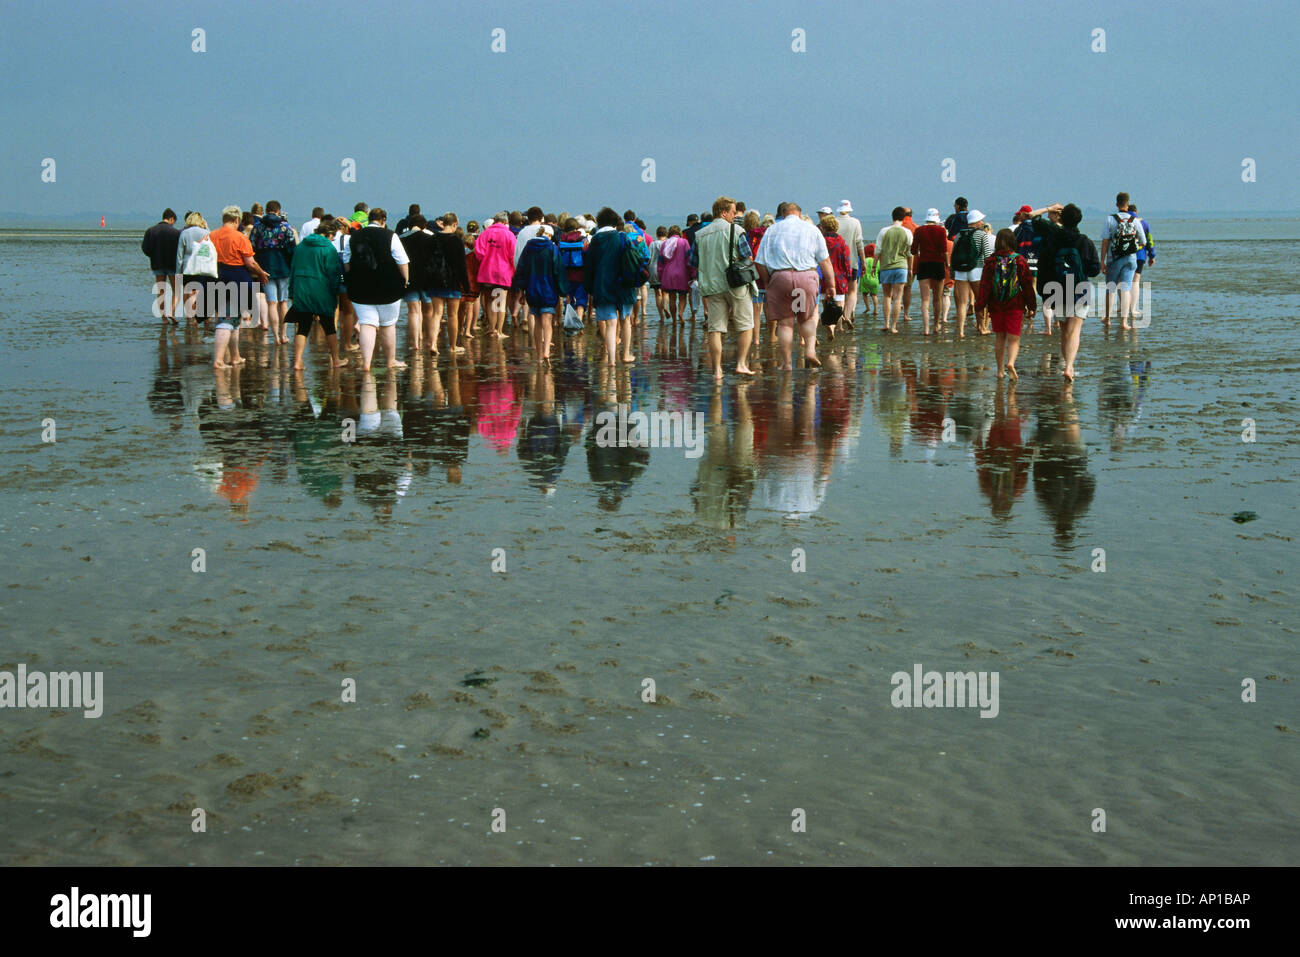 Hiking in the mudflat, Norderney Island, Germany Stock Photo